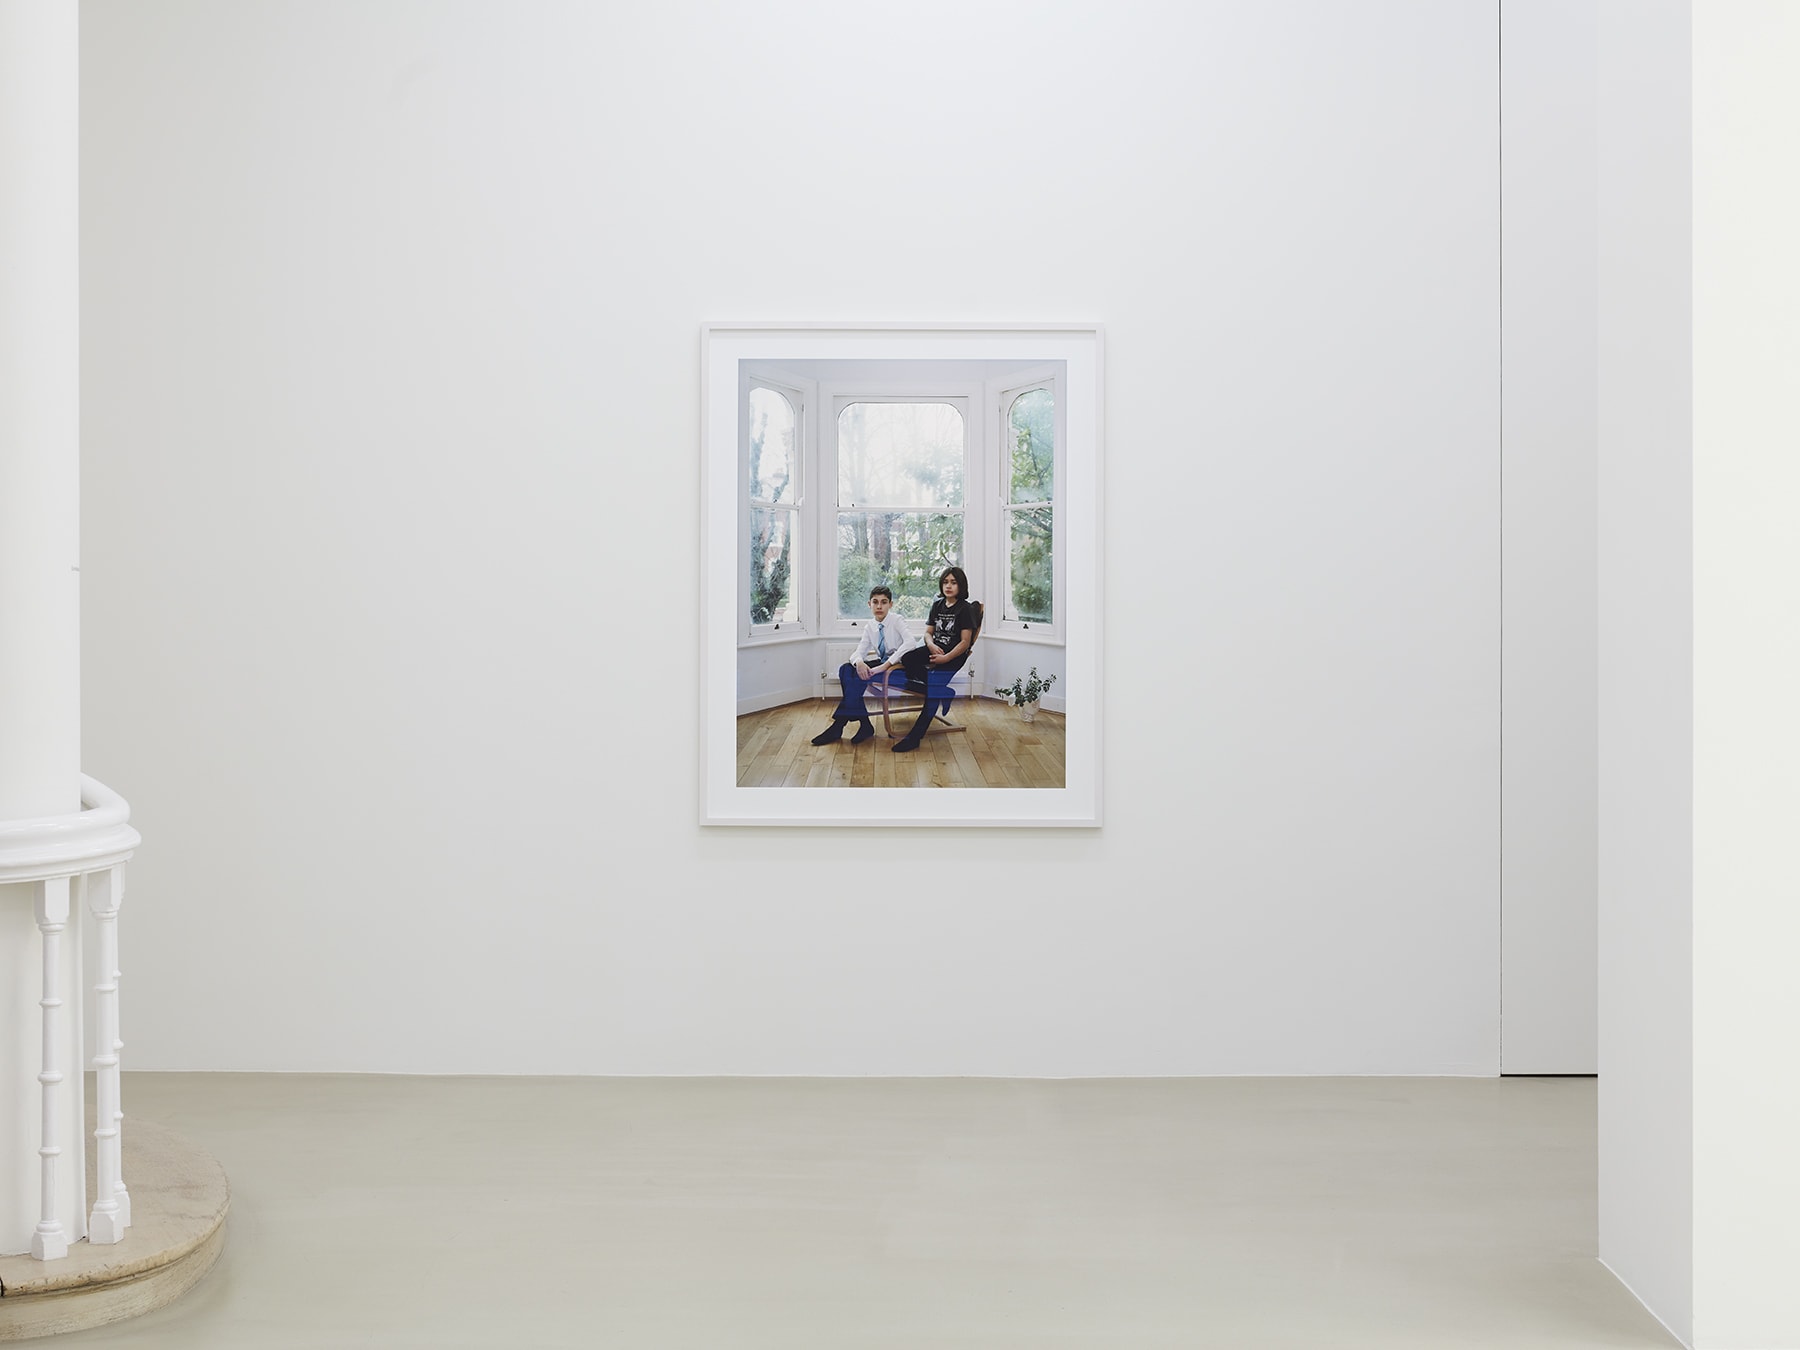 A framed photograph in Rineke Dijkstra's exhibition at Marian Goodman Gallery, London, March 2020